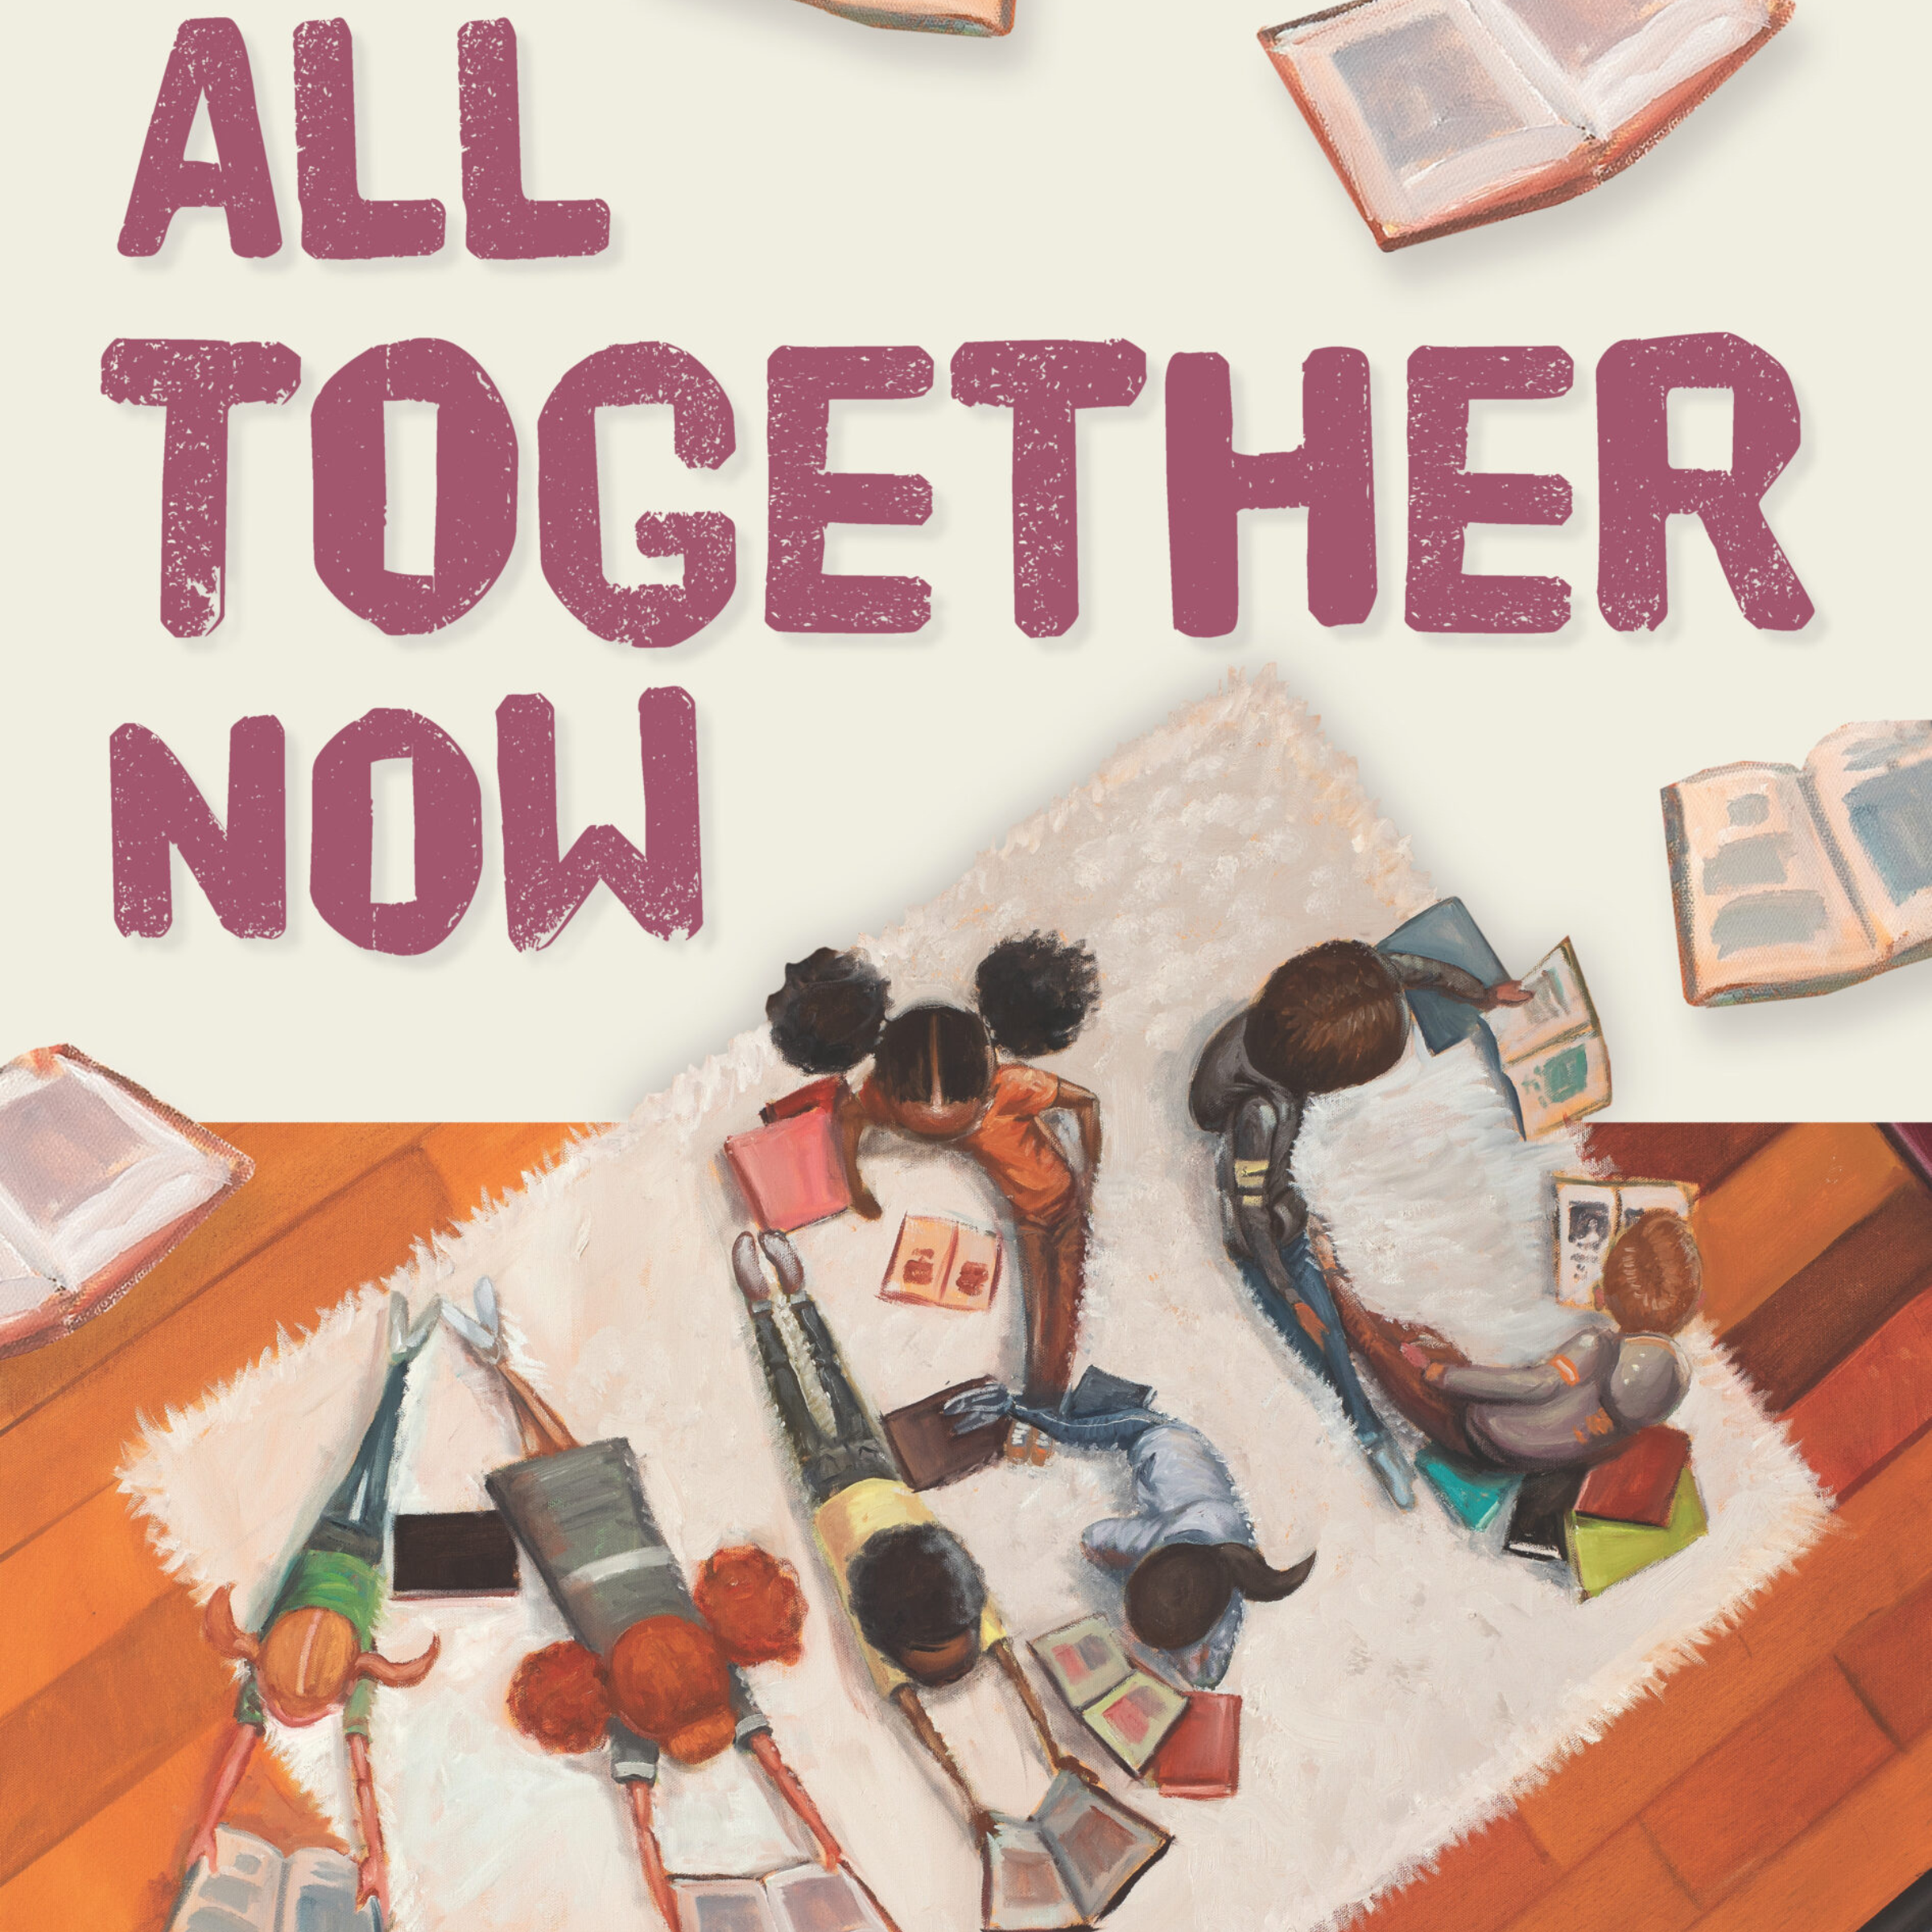 Text "All Together Now" over an illustration of children reading with their bodies forming the letters A B C.